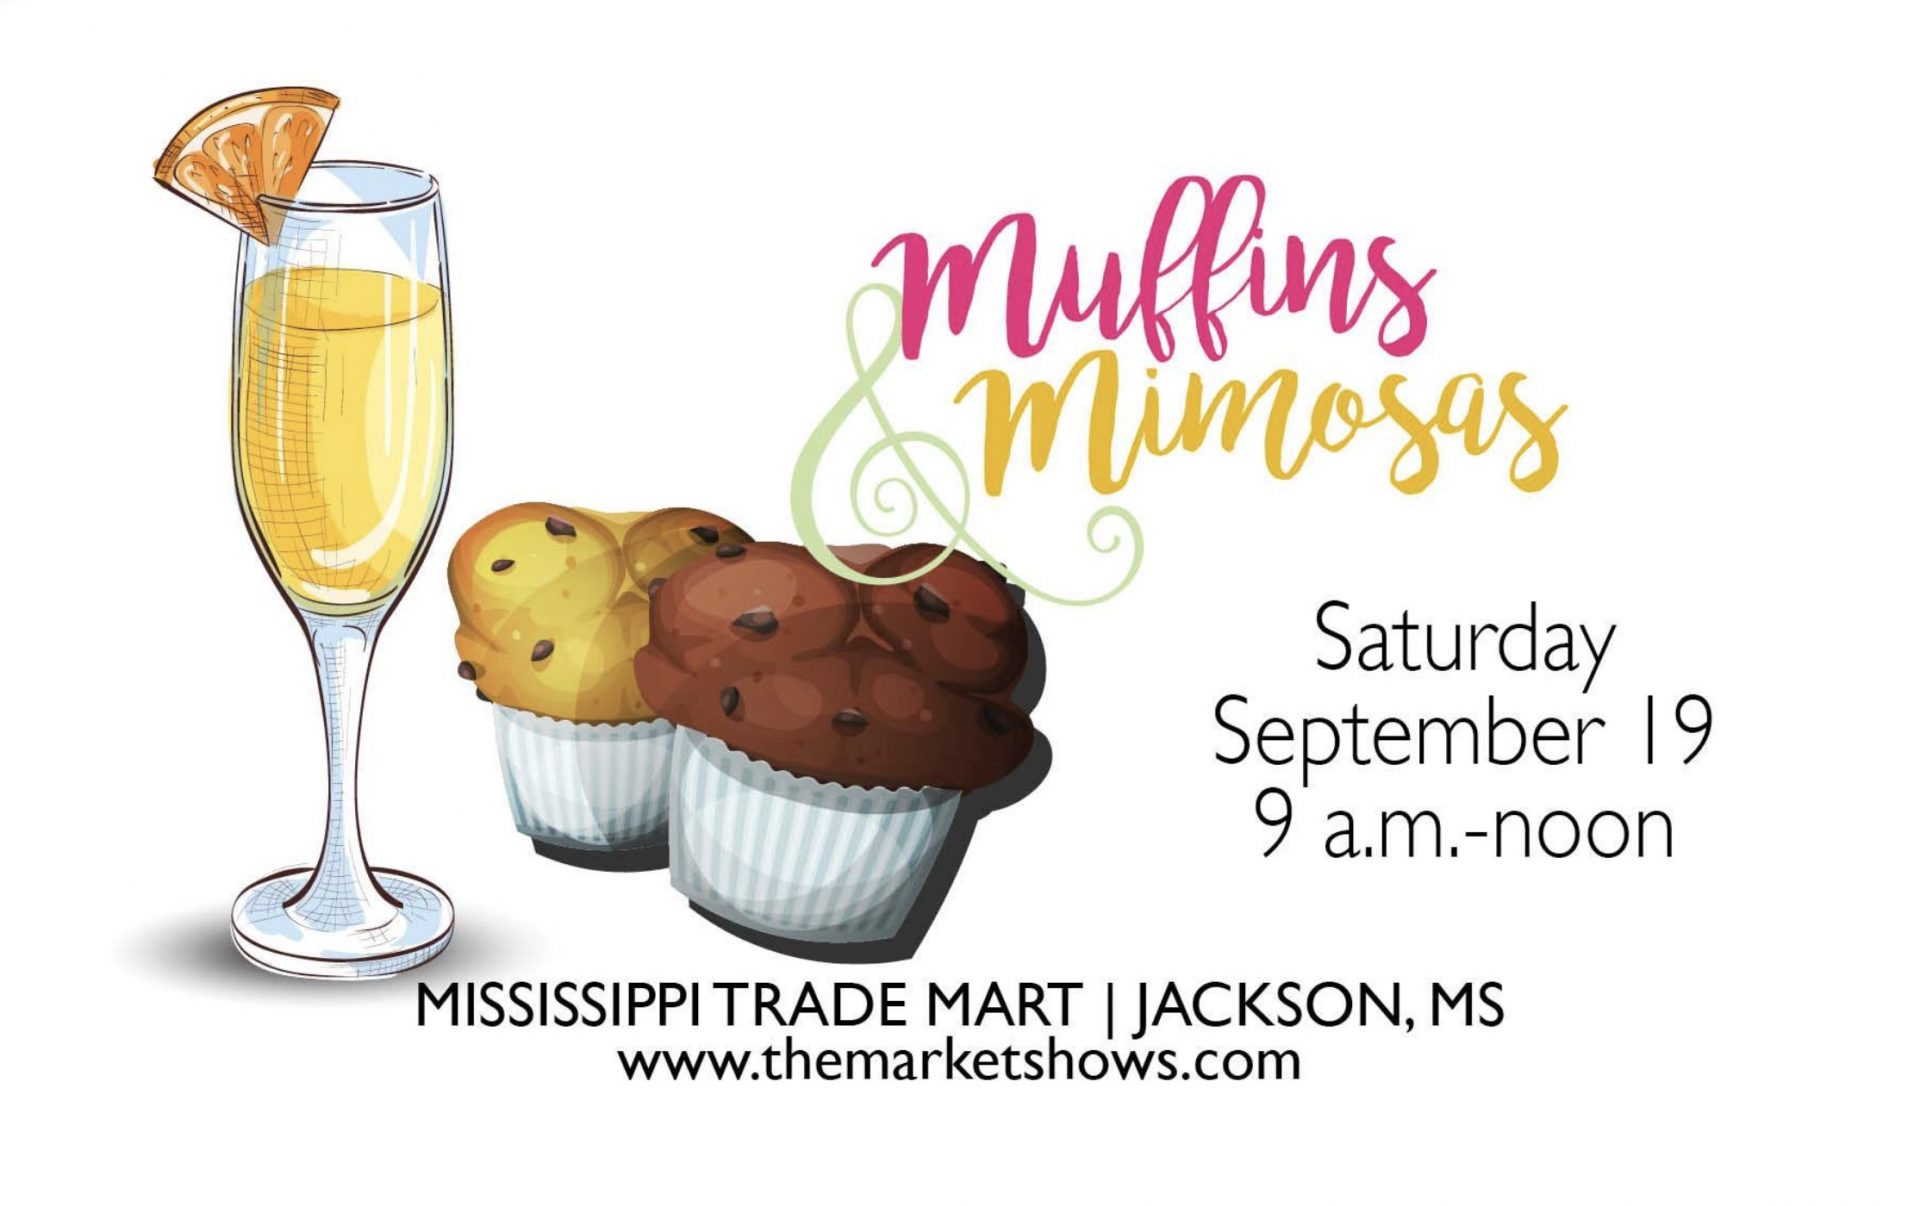 Muffins & Mimosas of Jackson | The Market Shows